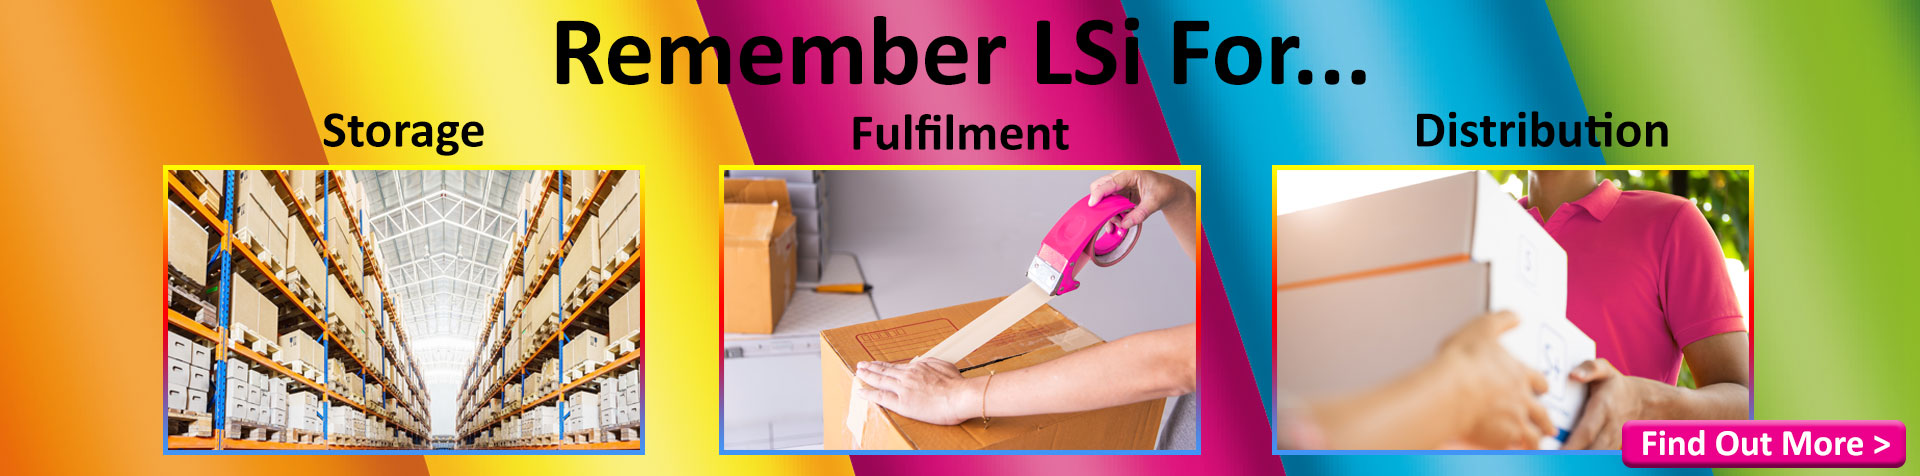 Remember LSi For Storage, Fulfilment and Distribution